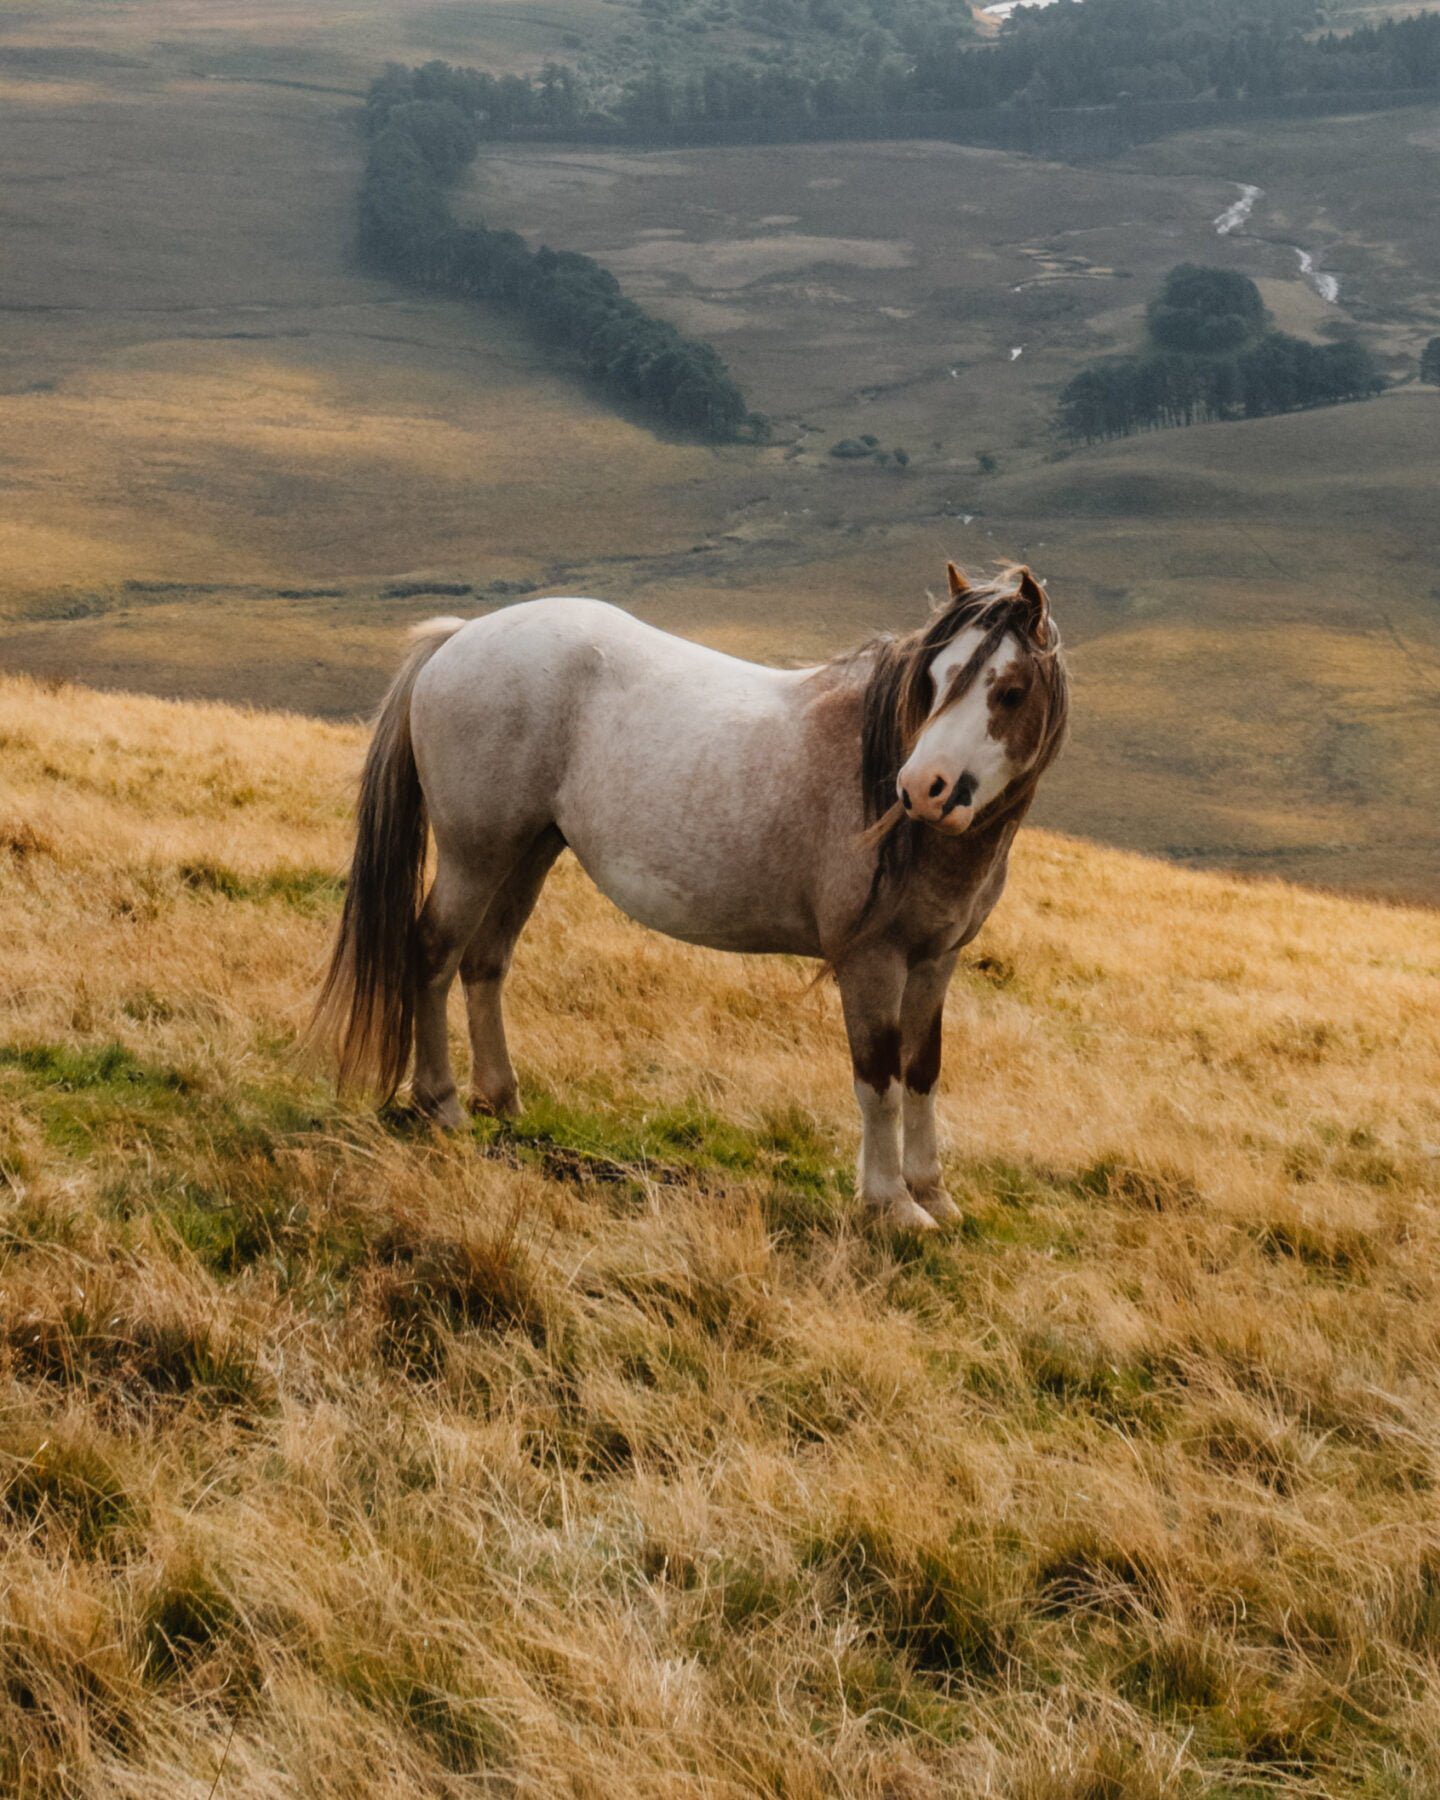 one of the wild horses in the Brecon Beacons